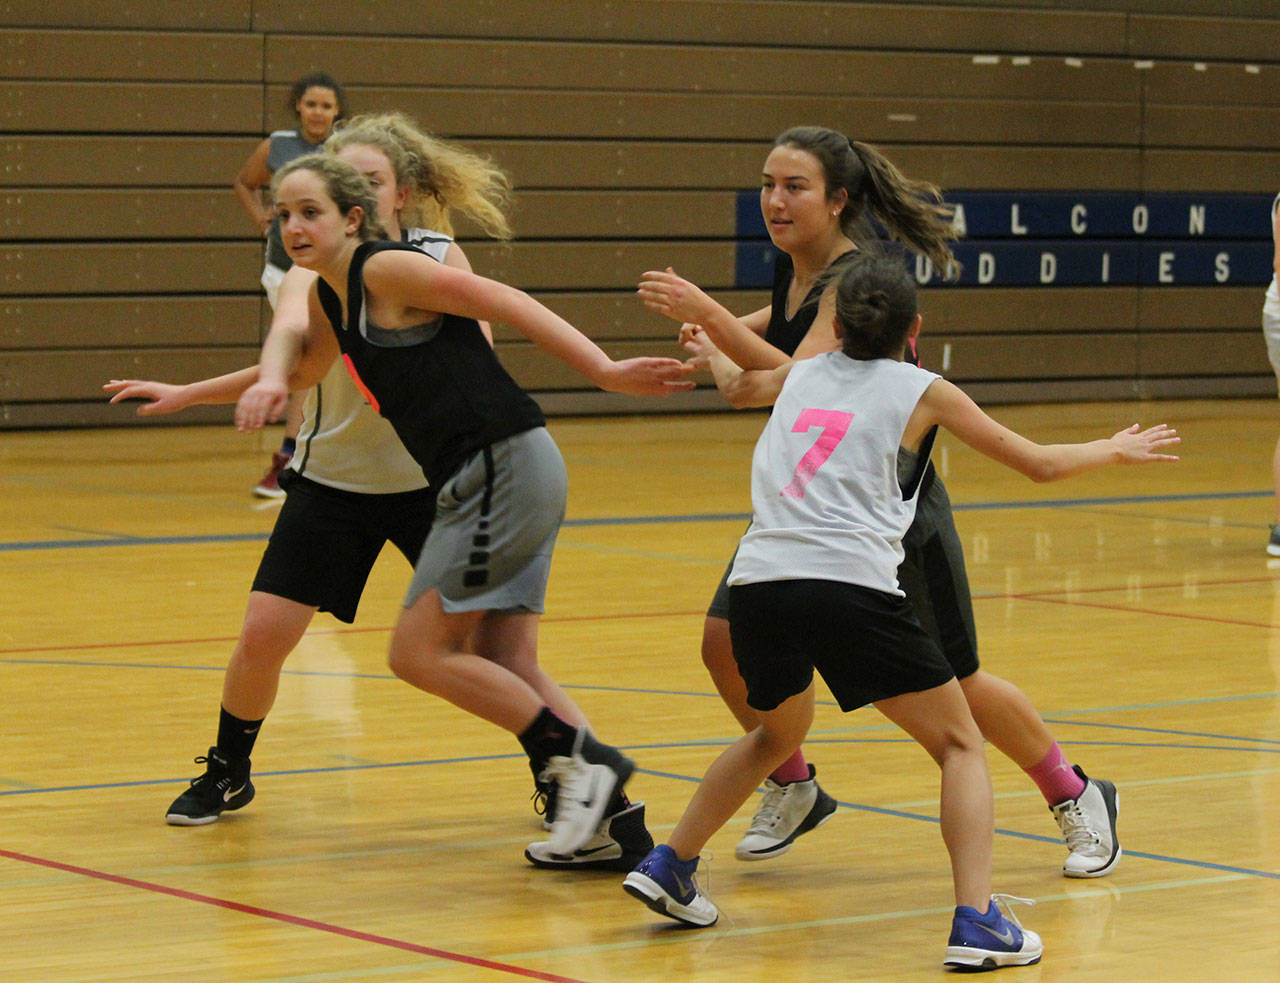 Ashley Lynch, left, and Farriss Jokinen try to get open against a full court press in practice last week. (Photo by Jim Waller/South Whidbey Record)